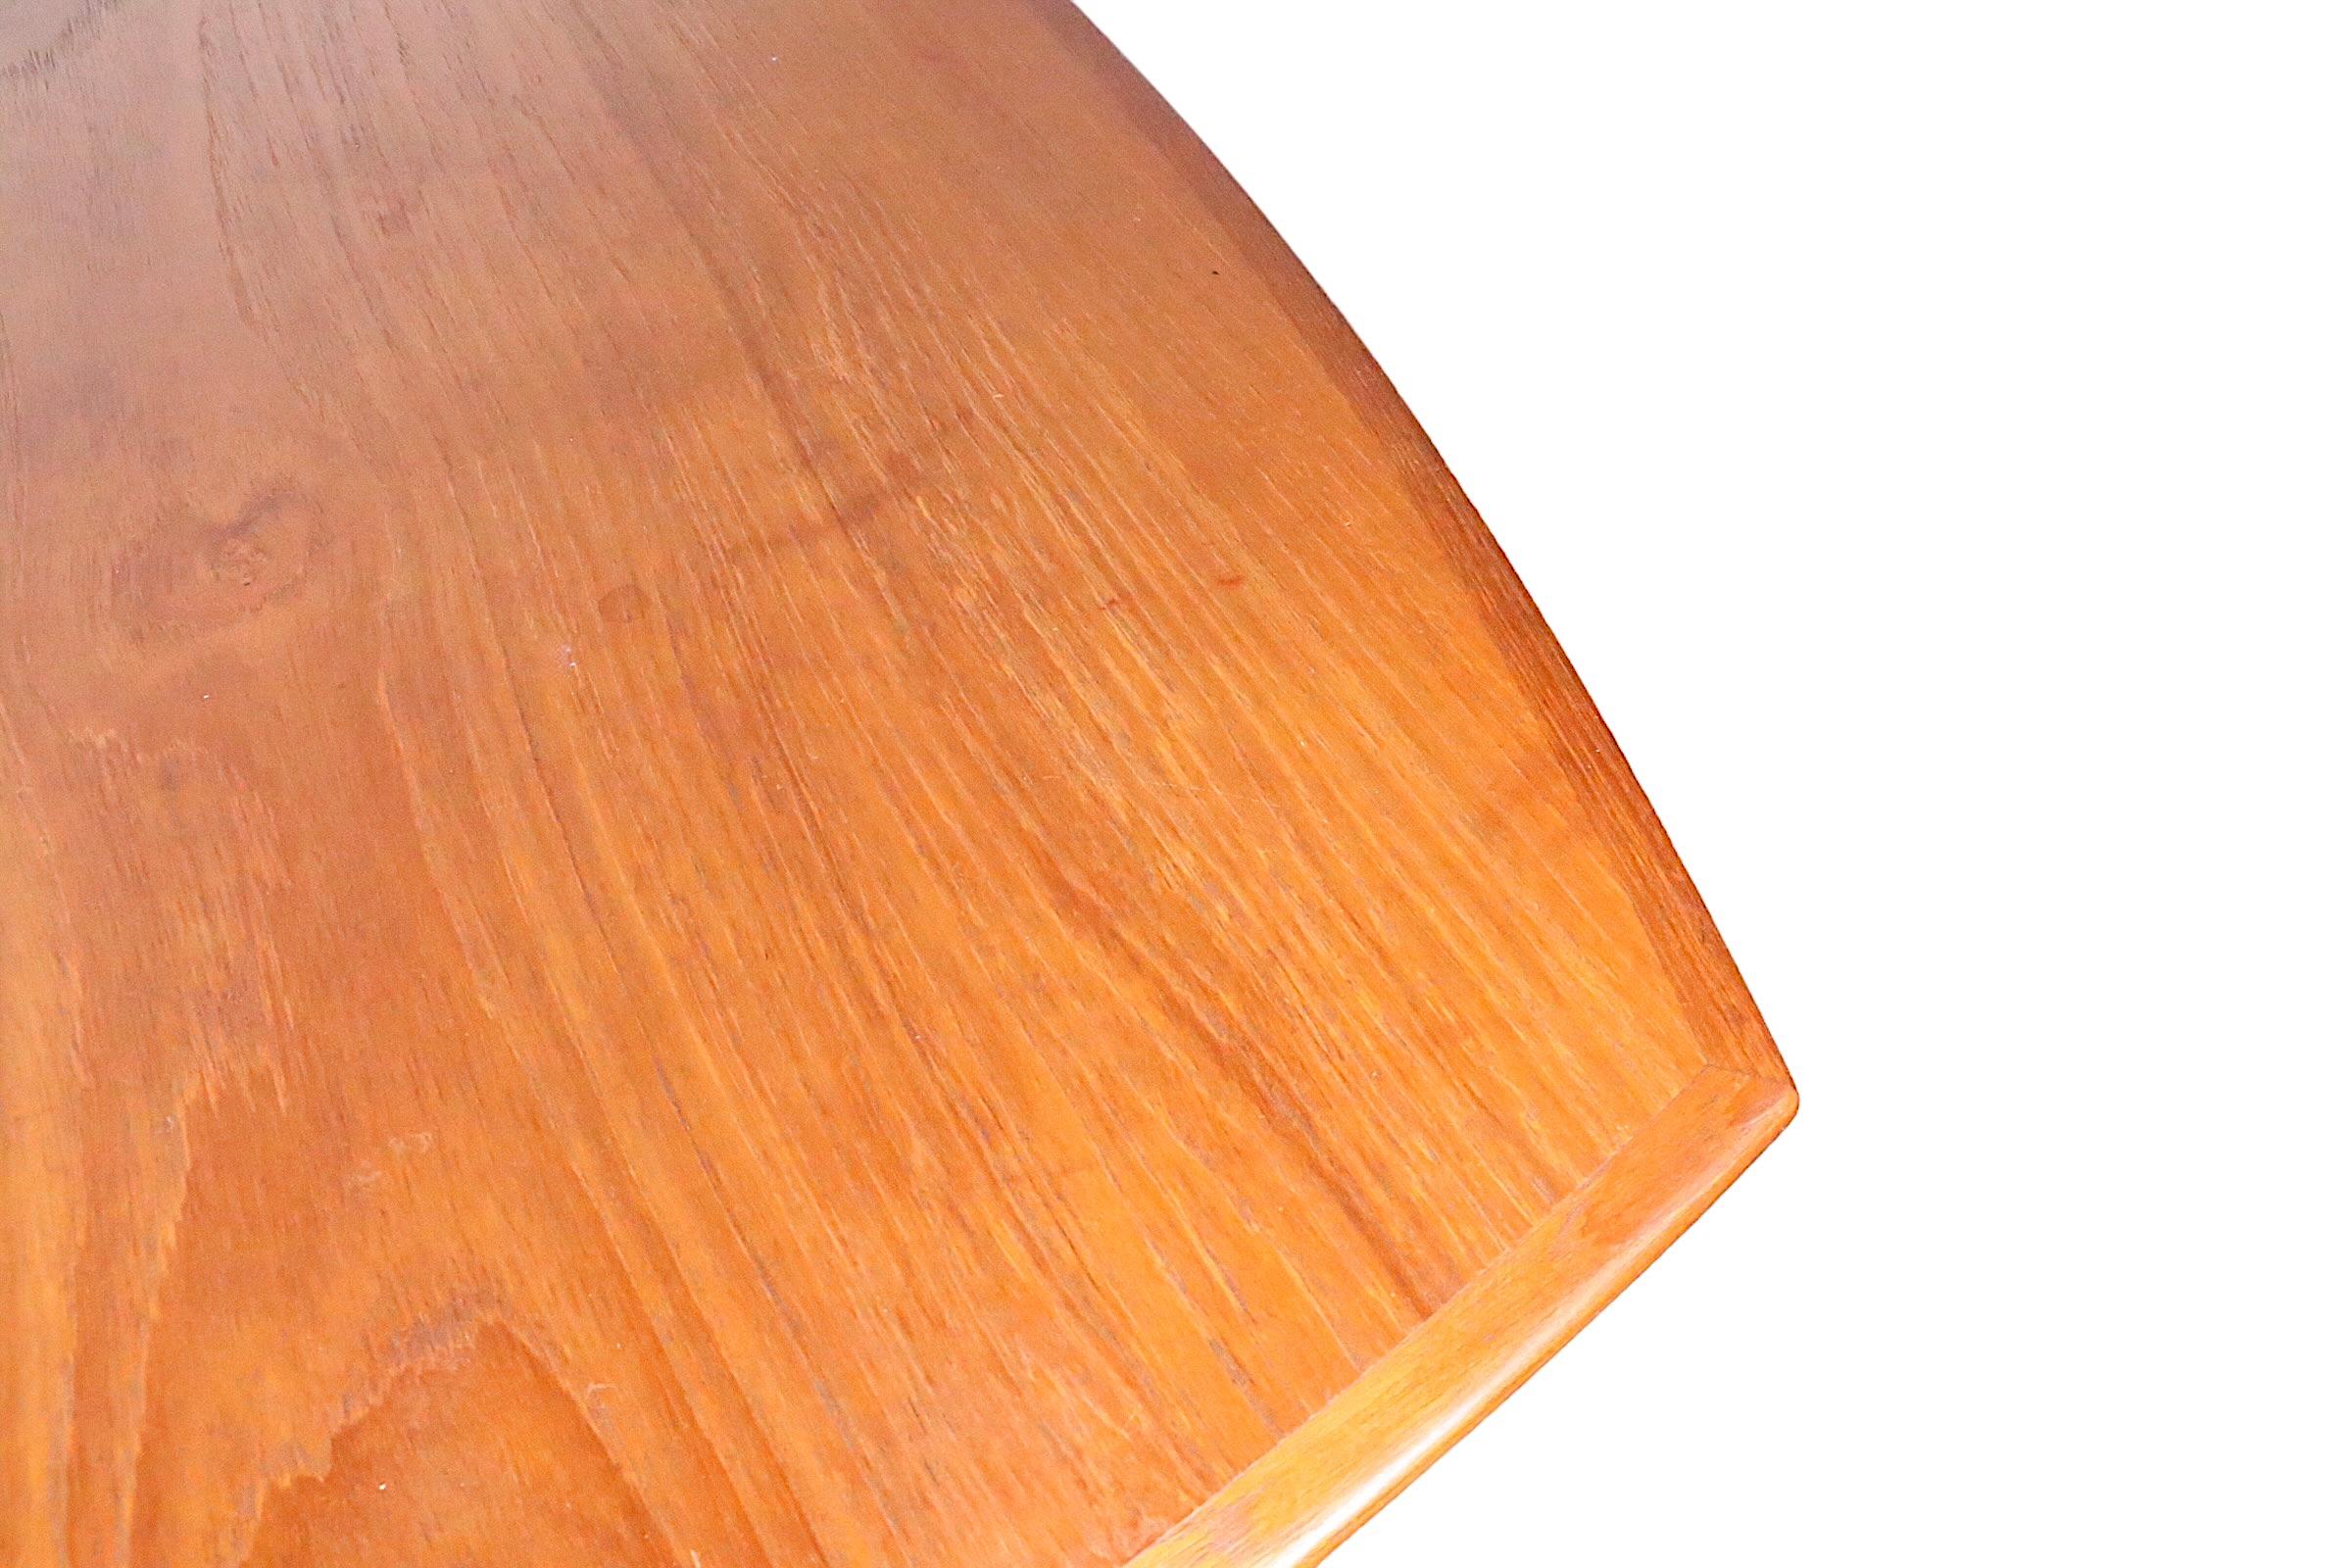 Danish Mid Century Modern Teak Extension  Dining Table by H W Klein  c 1950's For Sale 2